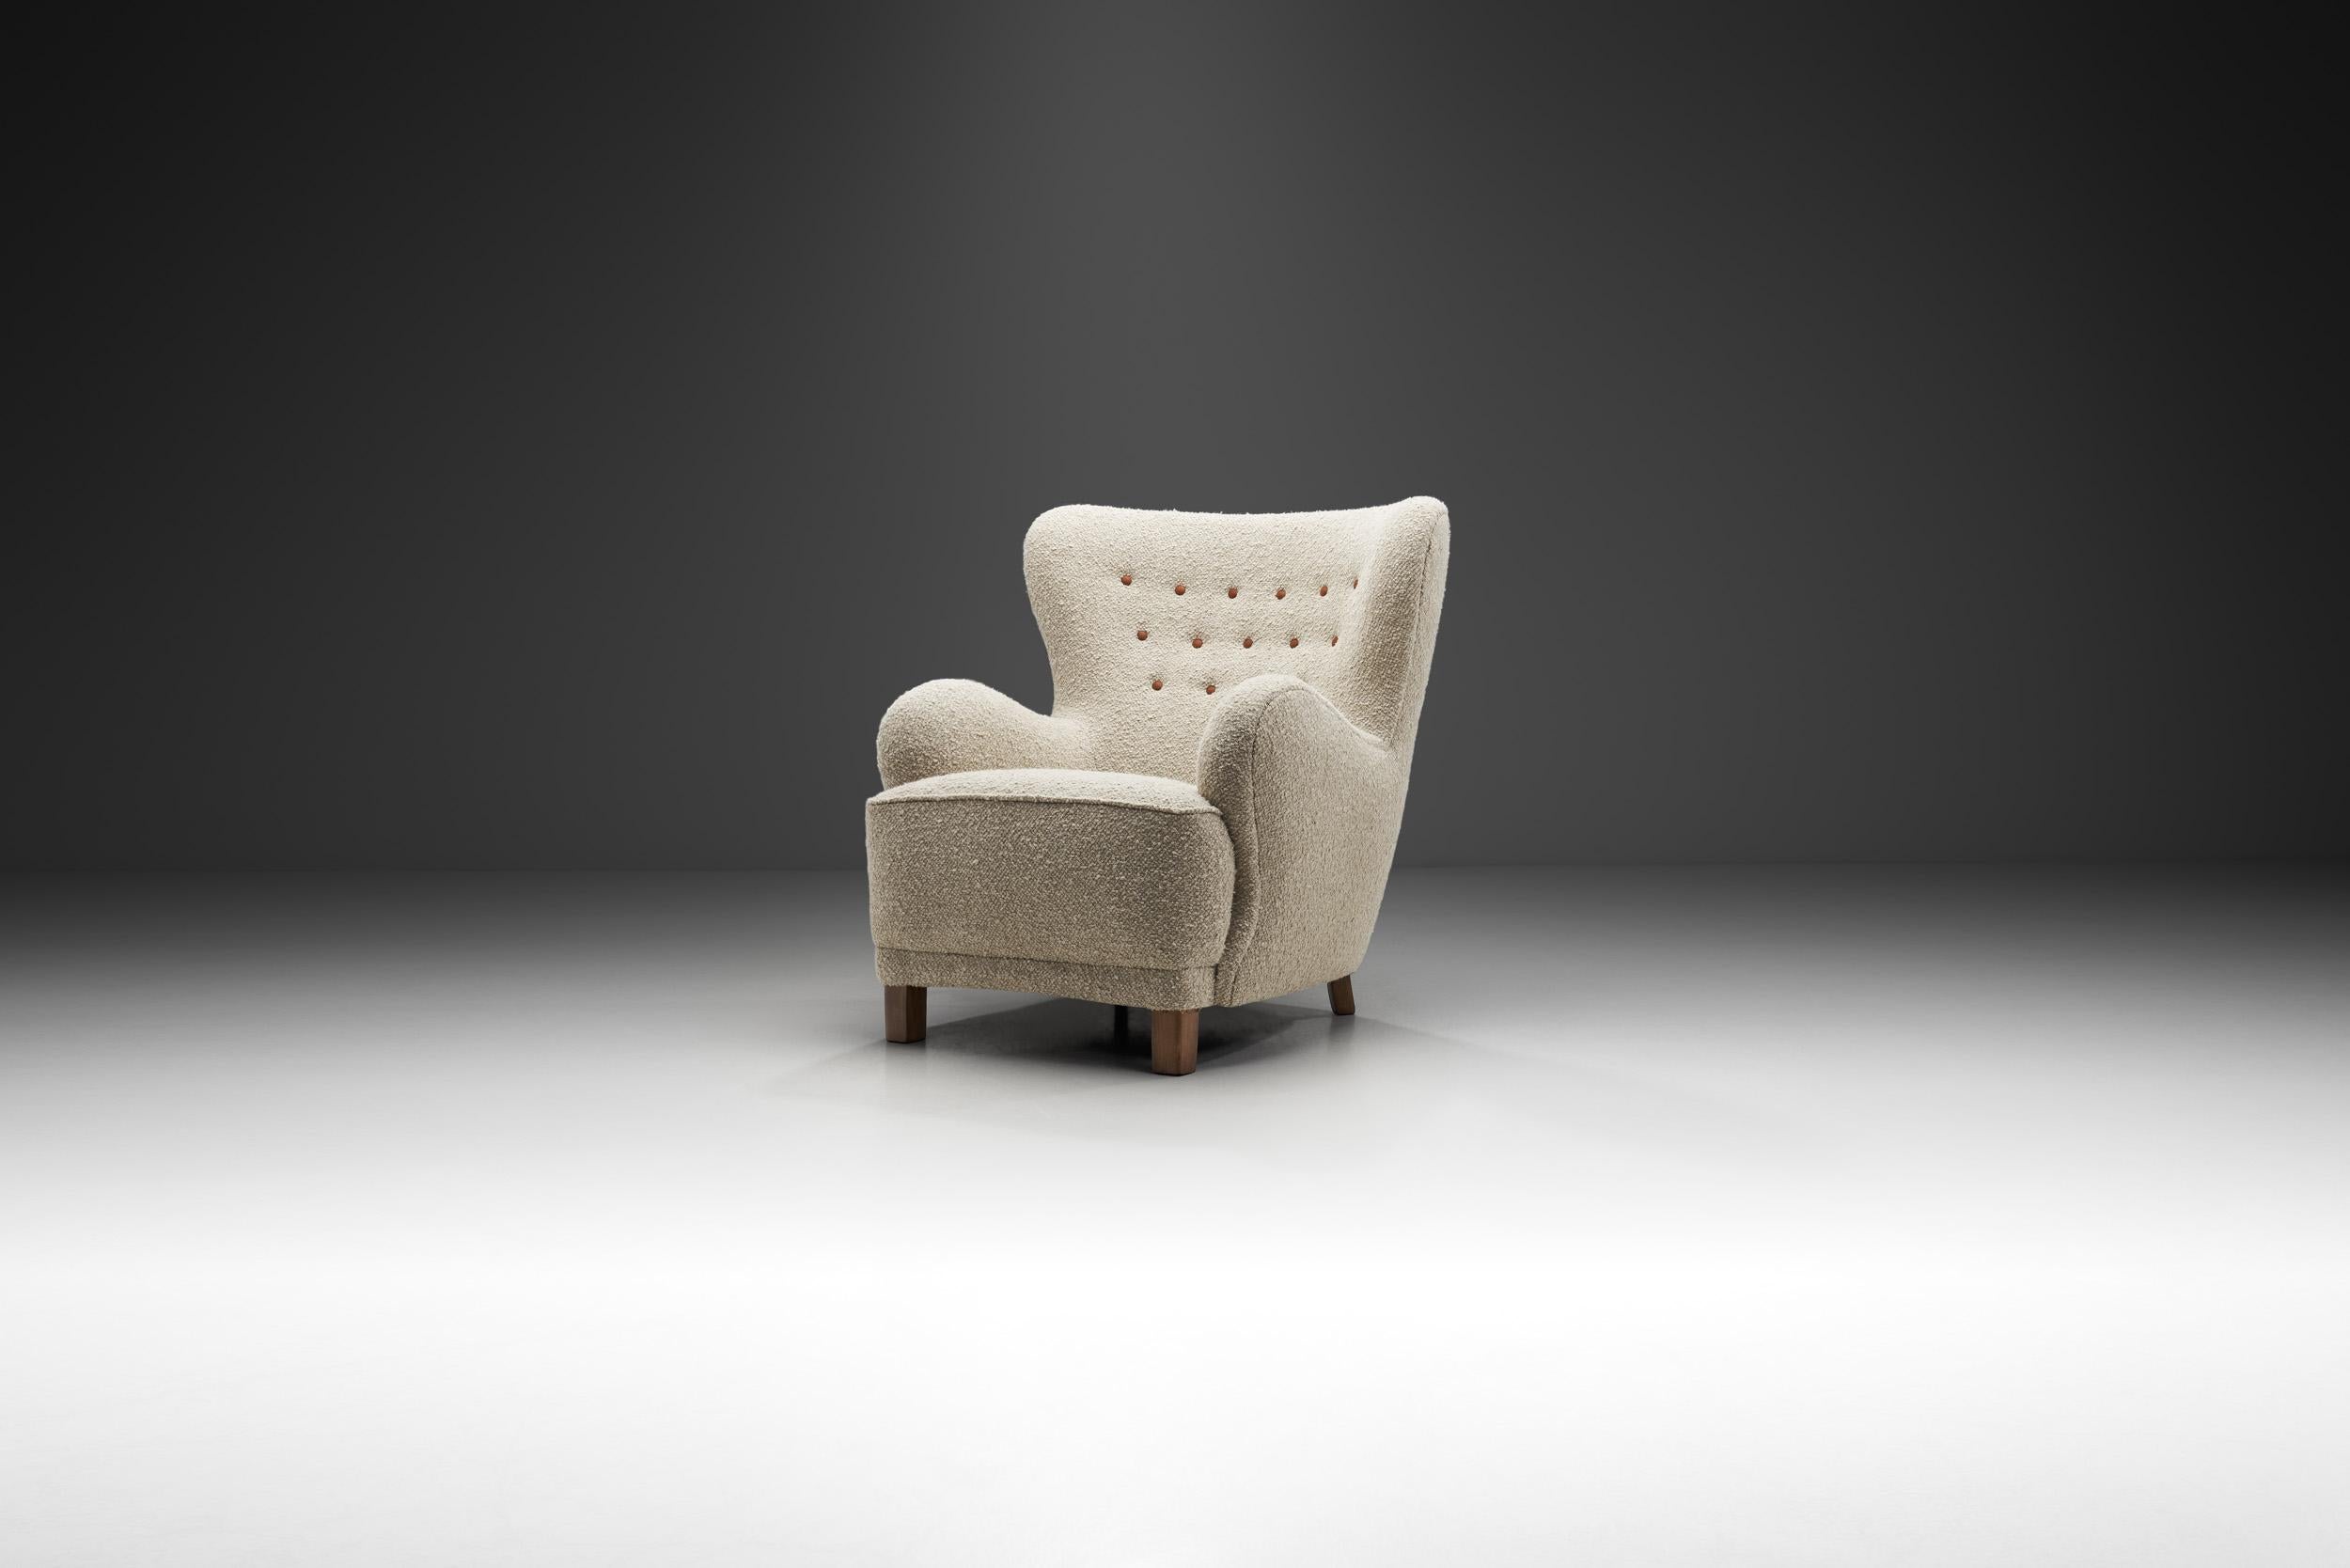 This unique armchair is a great representation of the quality and craftsmanship of Danish master cabinetmakers and the immediately recognizable characteristics of Scandinavian design. Particularly visible here is Danish designers’ predilection for